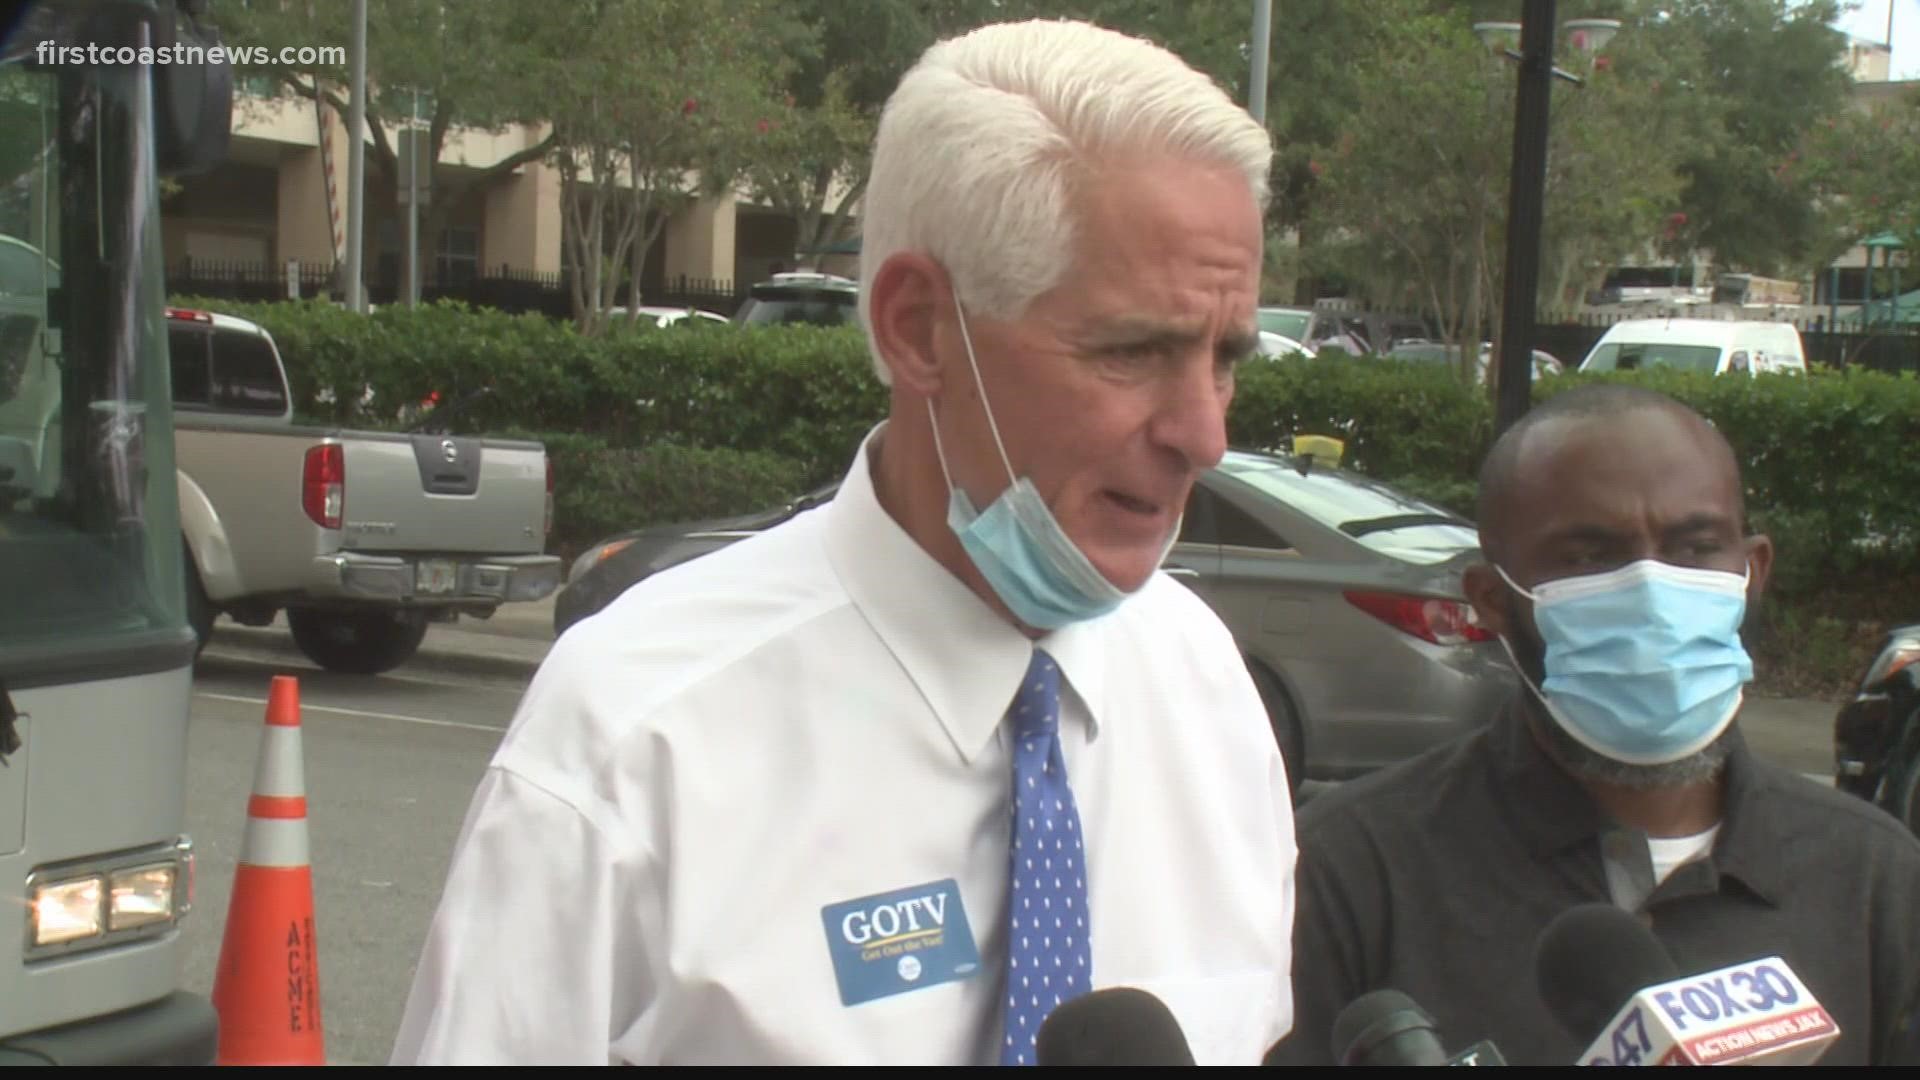 "It's not complicated," Crist said. "Get the vaccine. Wear a mask."